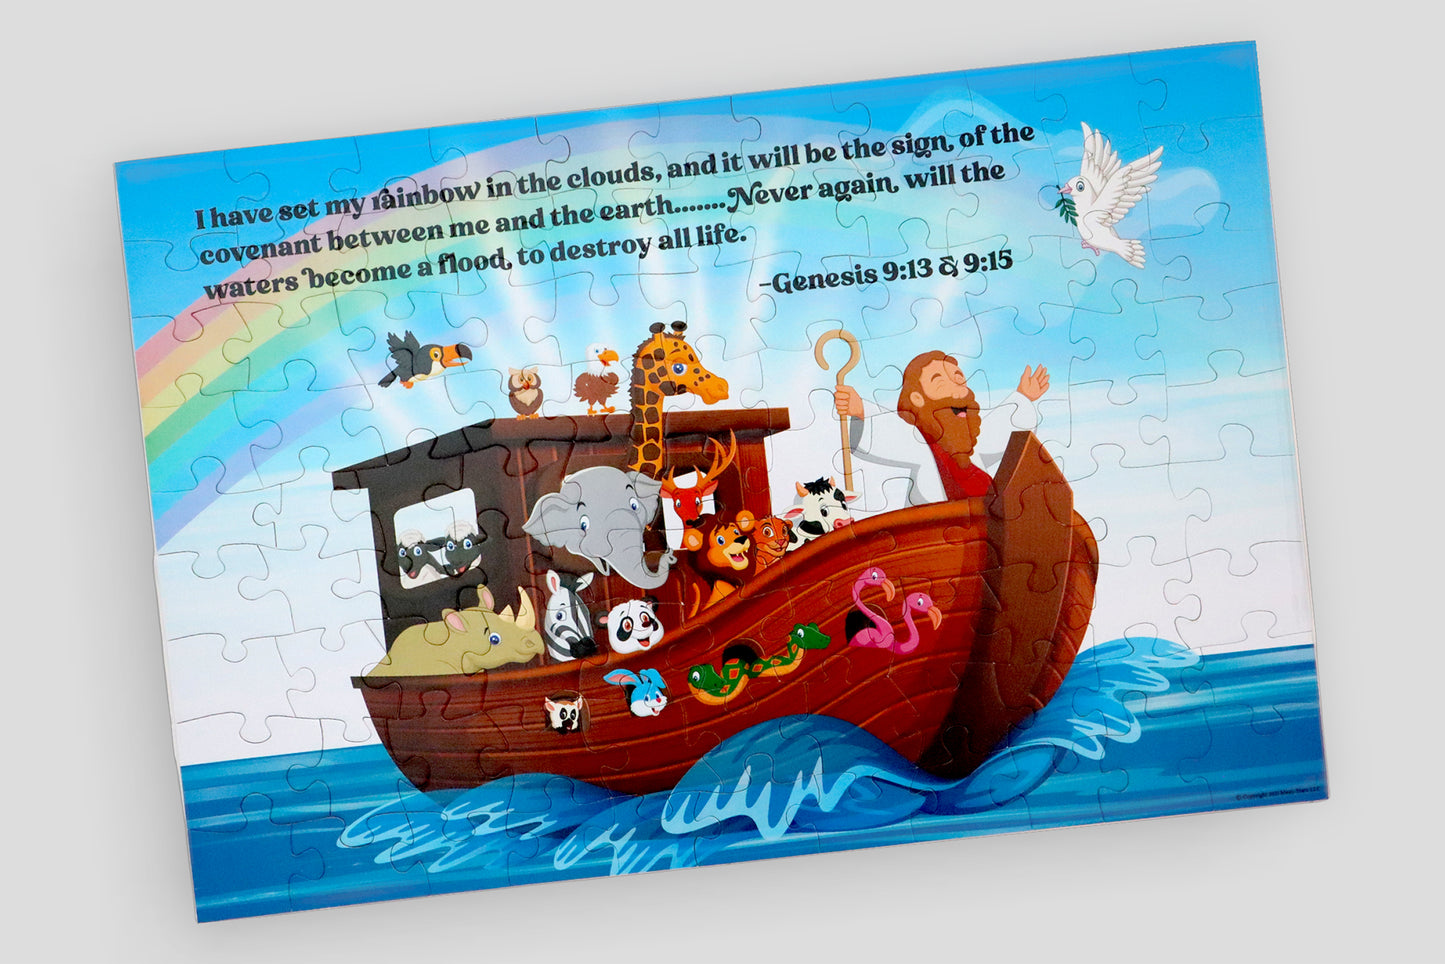 99 Piece Noah's Ark Puzzle built and complete. Puzzle image depicts bible scripture along with a rainbow and animals as well Noah on the Ark. I Sow Brilliant